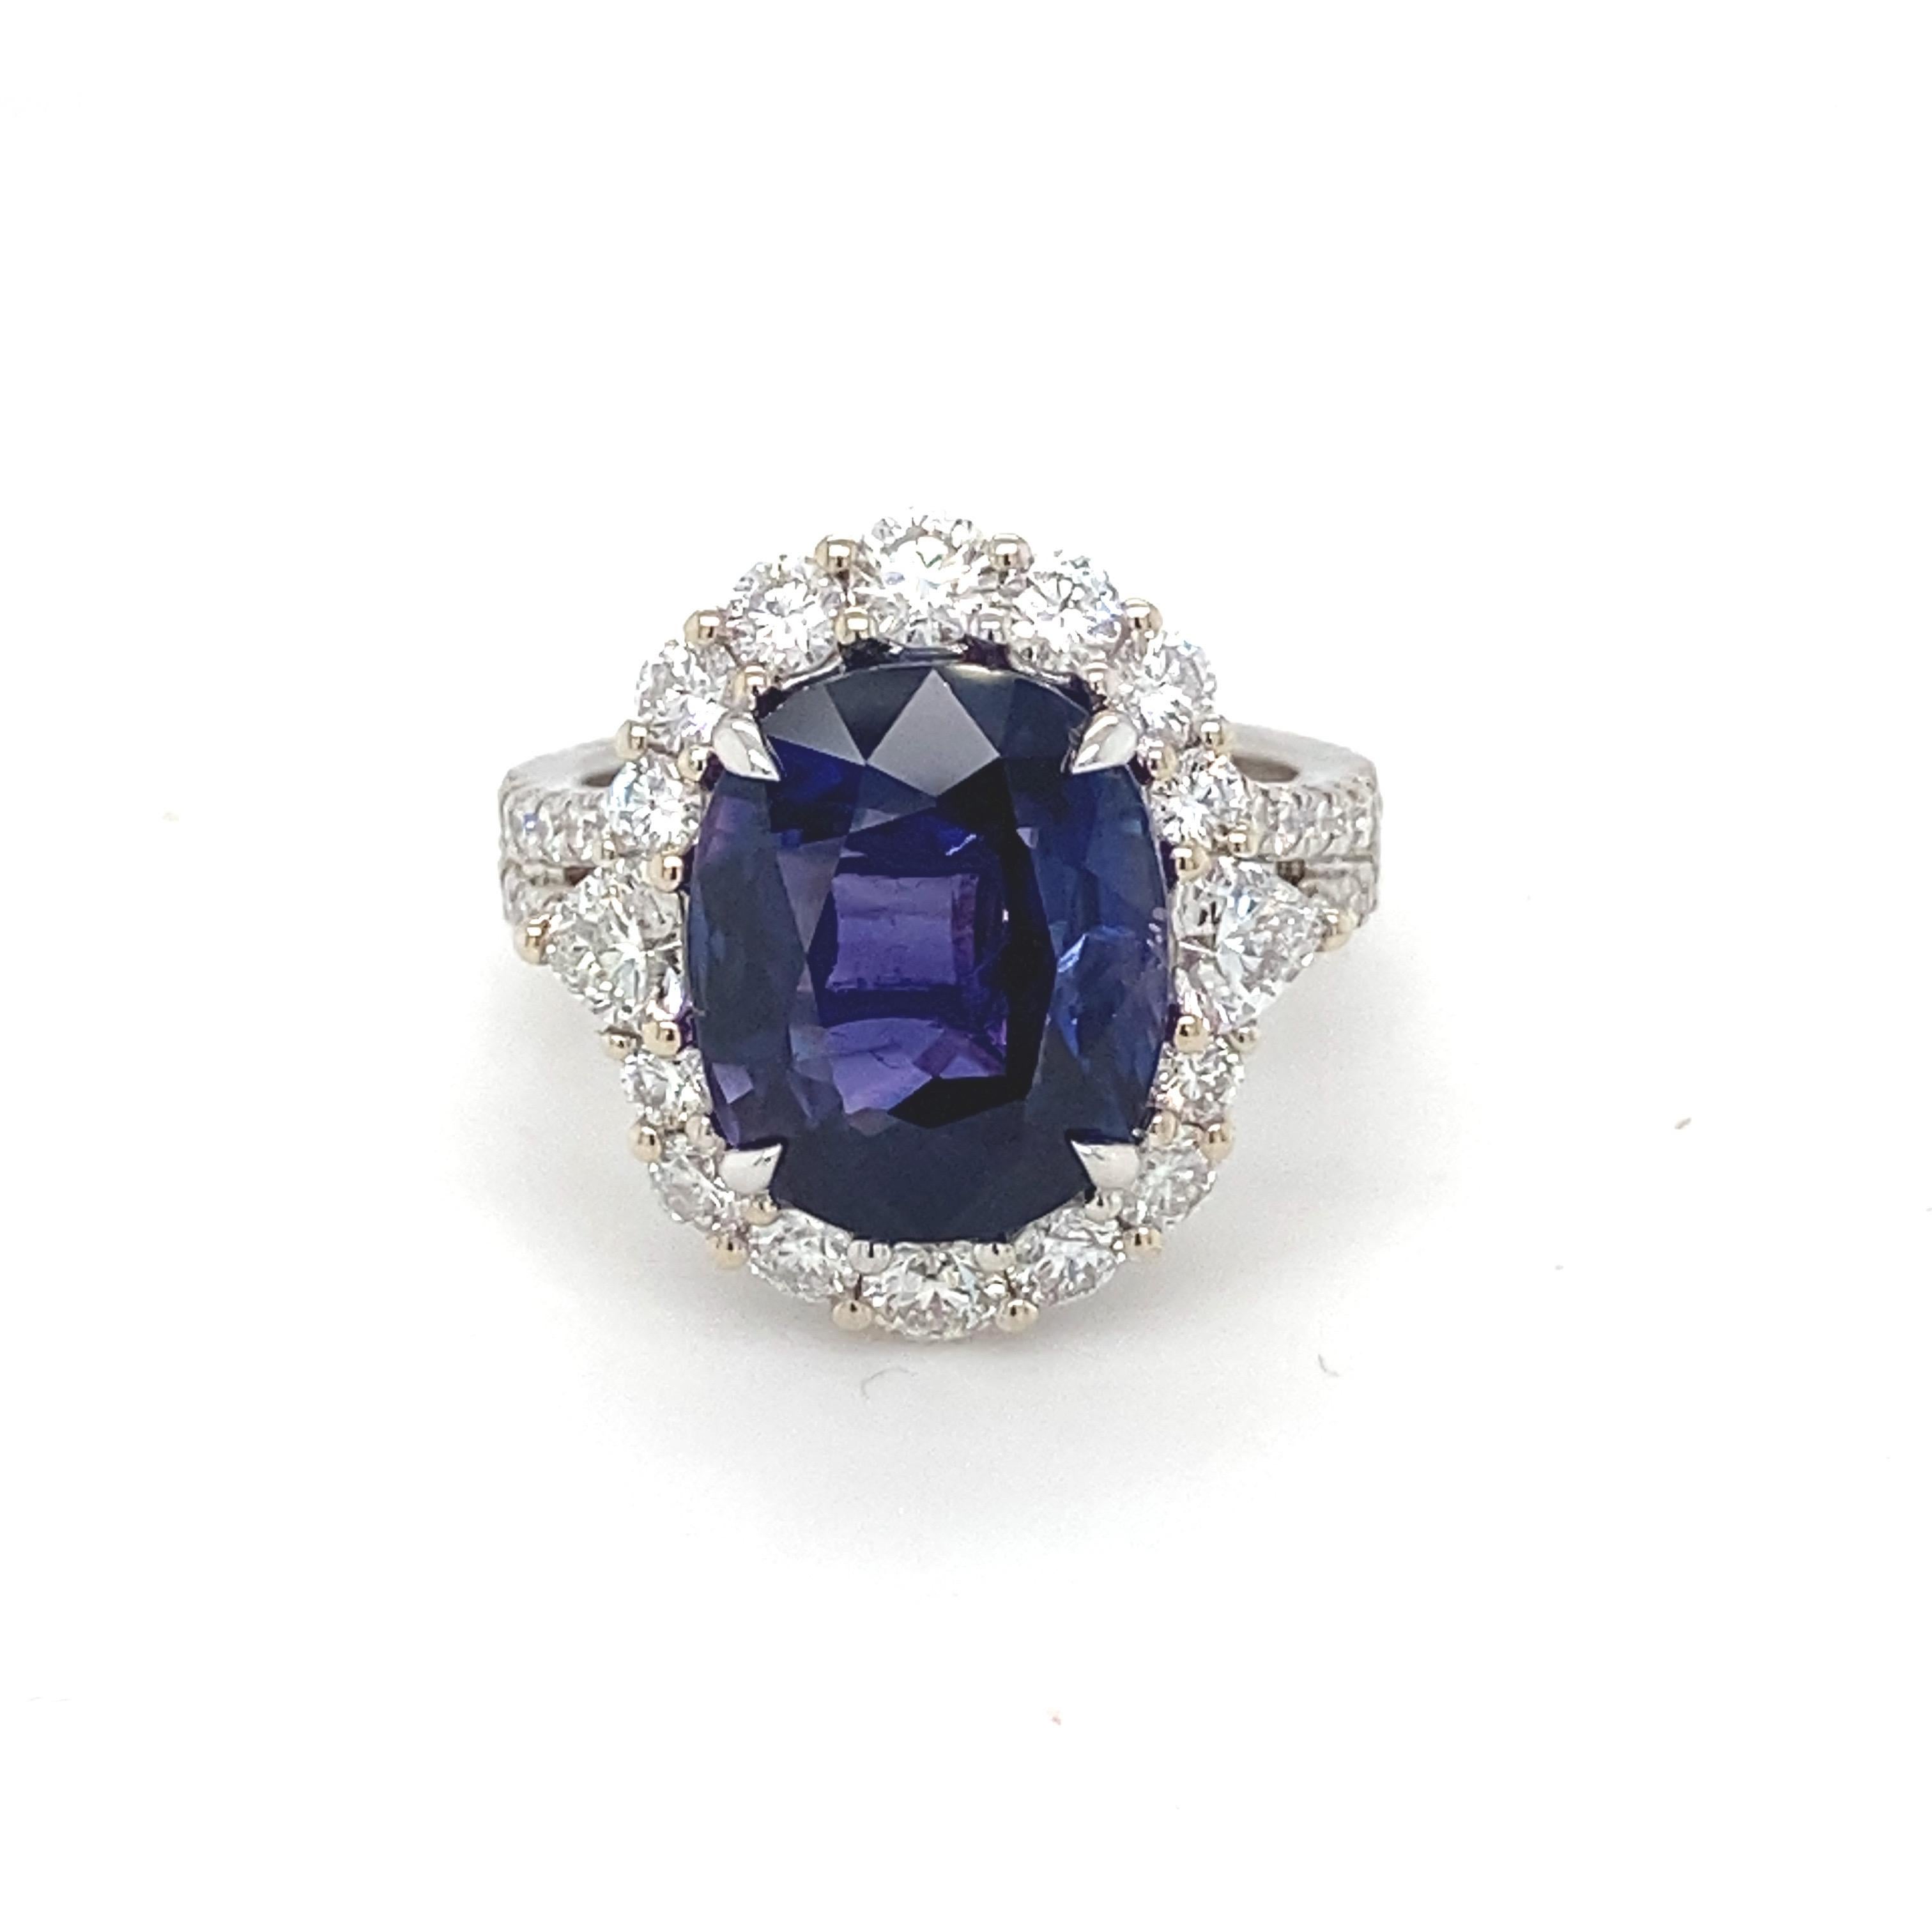 This GIA Certified Violet Blue Oval Sapphire is set in four prongs and framed by a glistening diamond halo. Diamond accents on the band give this sapphire ring an elegant yet stunning look! This timeless engagement ring is hand made by highly